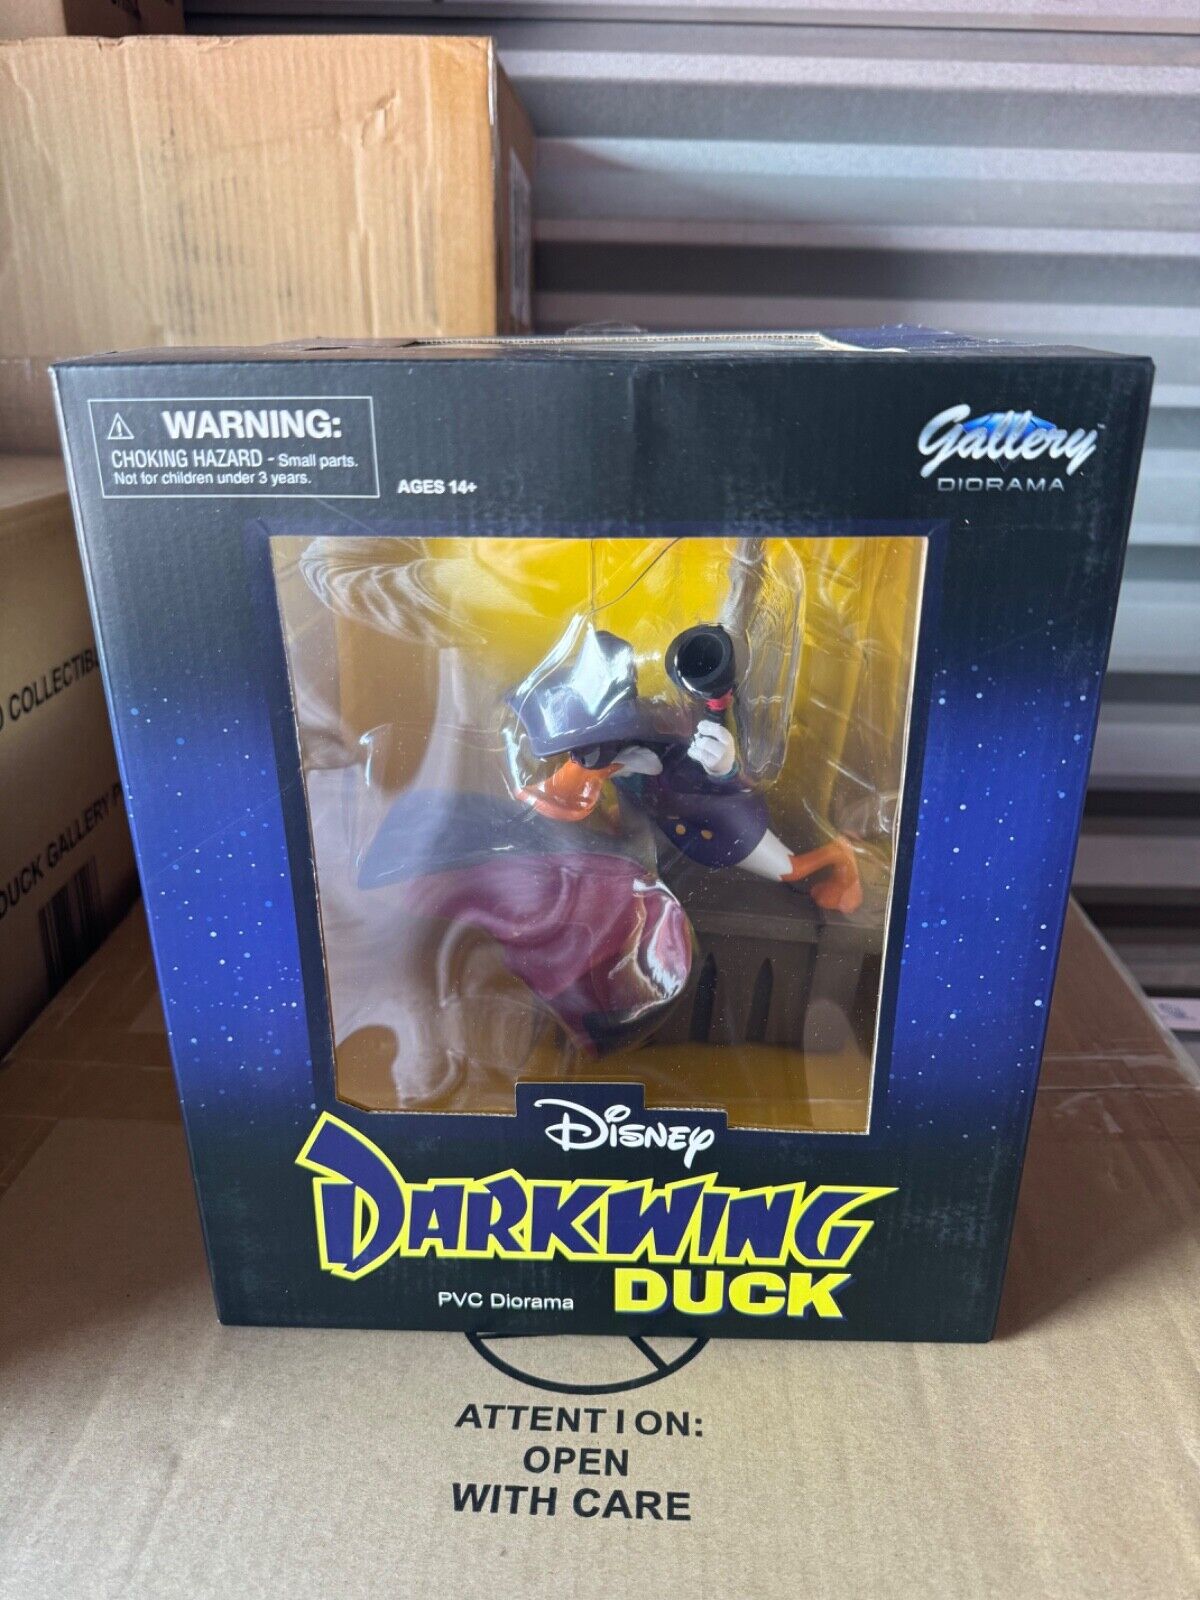 Diamond Select Toys Darkwing Duck Gallery Statue Diorama Brand New In Hand